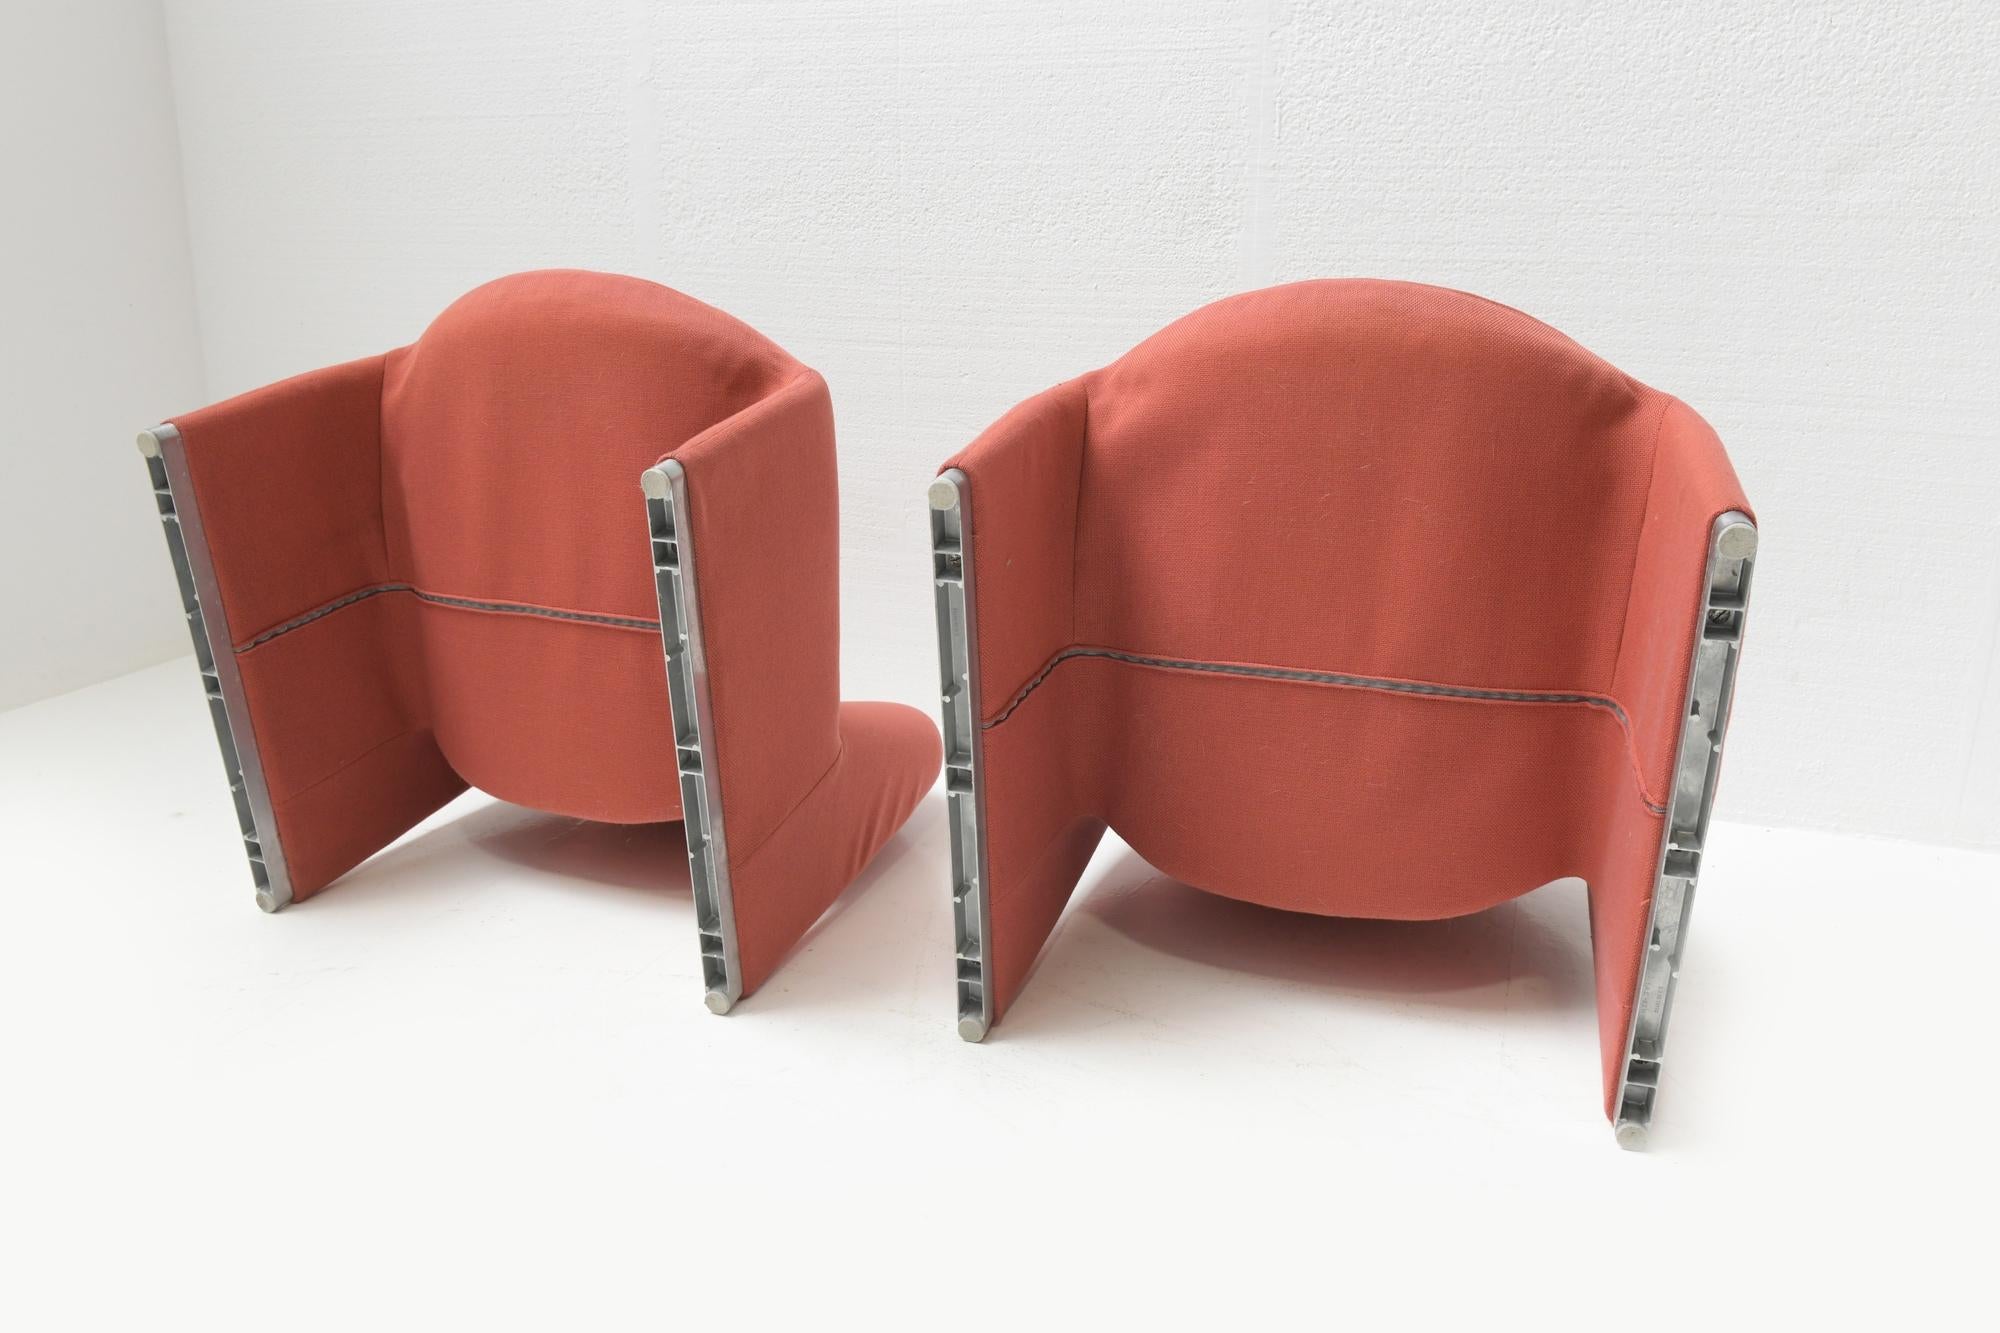  Vintage Alky chairs in original red fabric by Giancarlo Piretti for Castelli 1